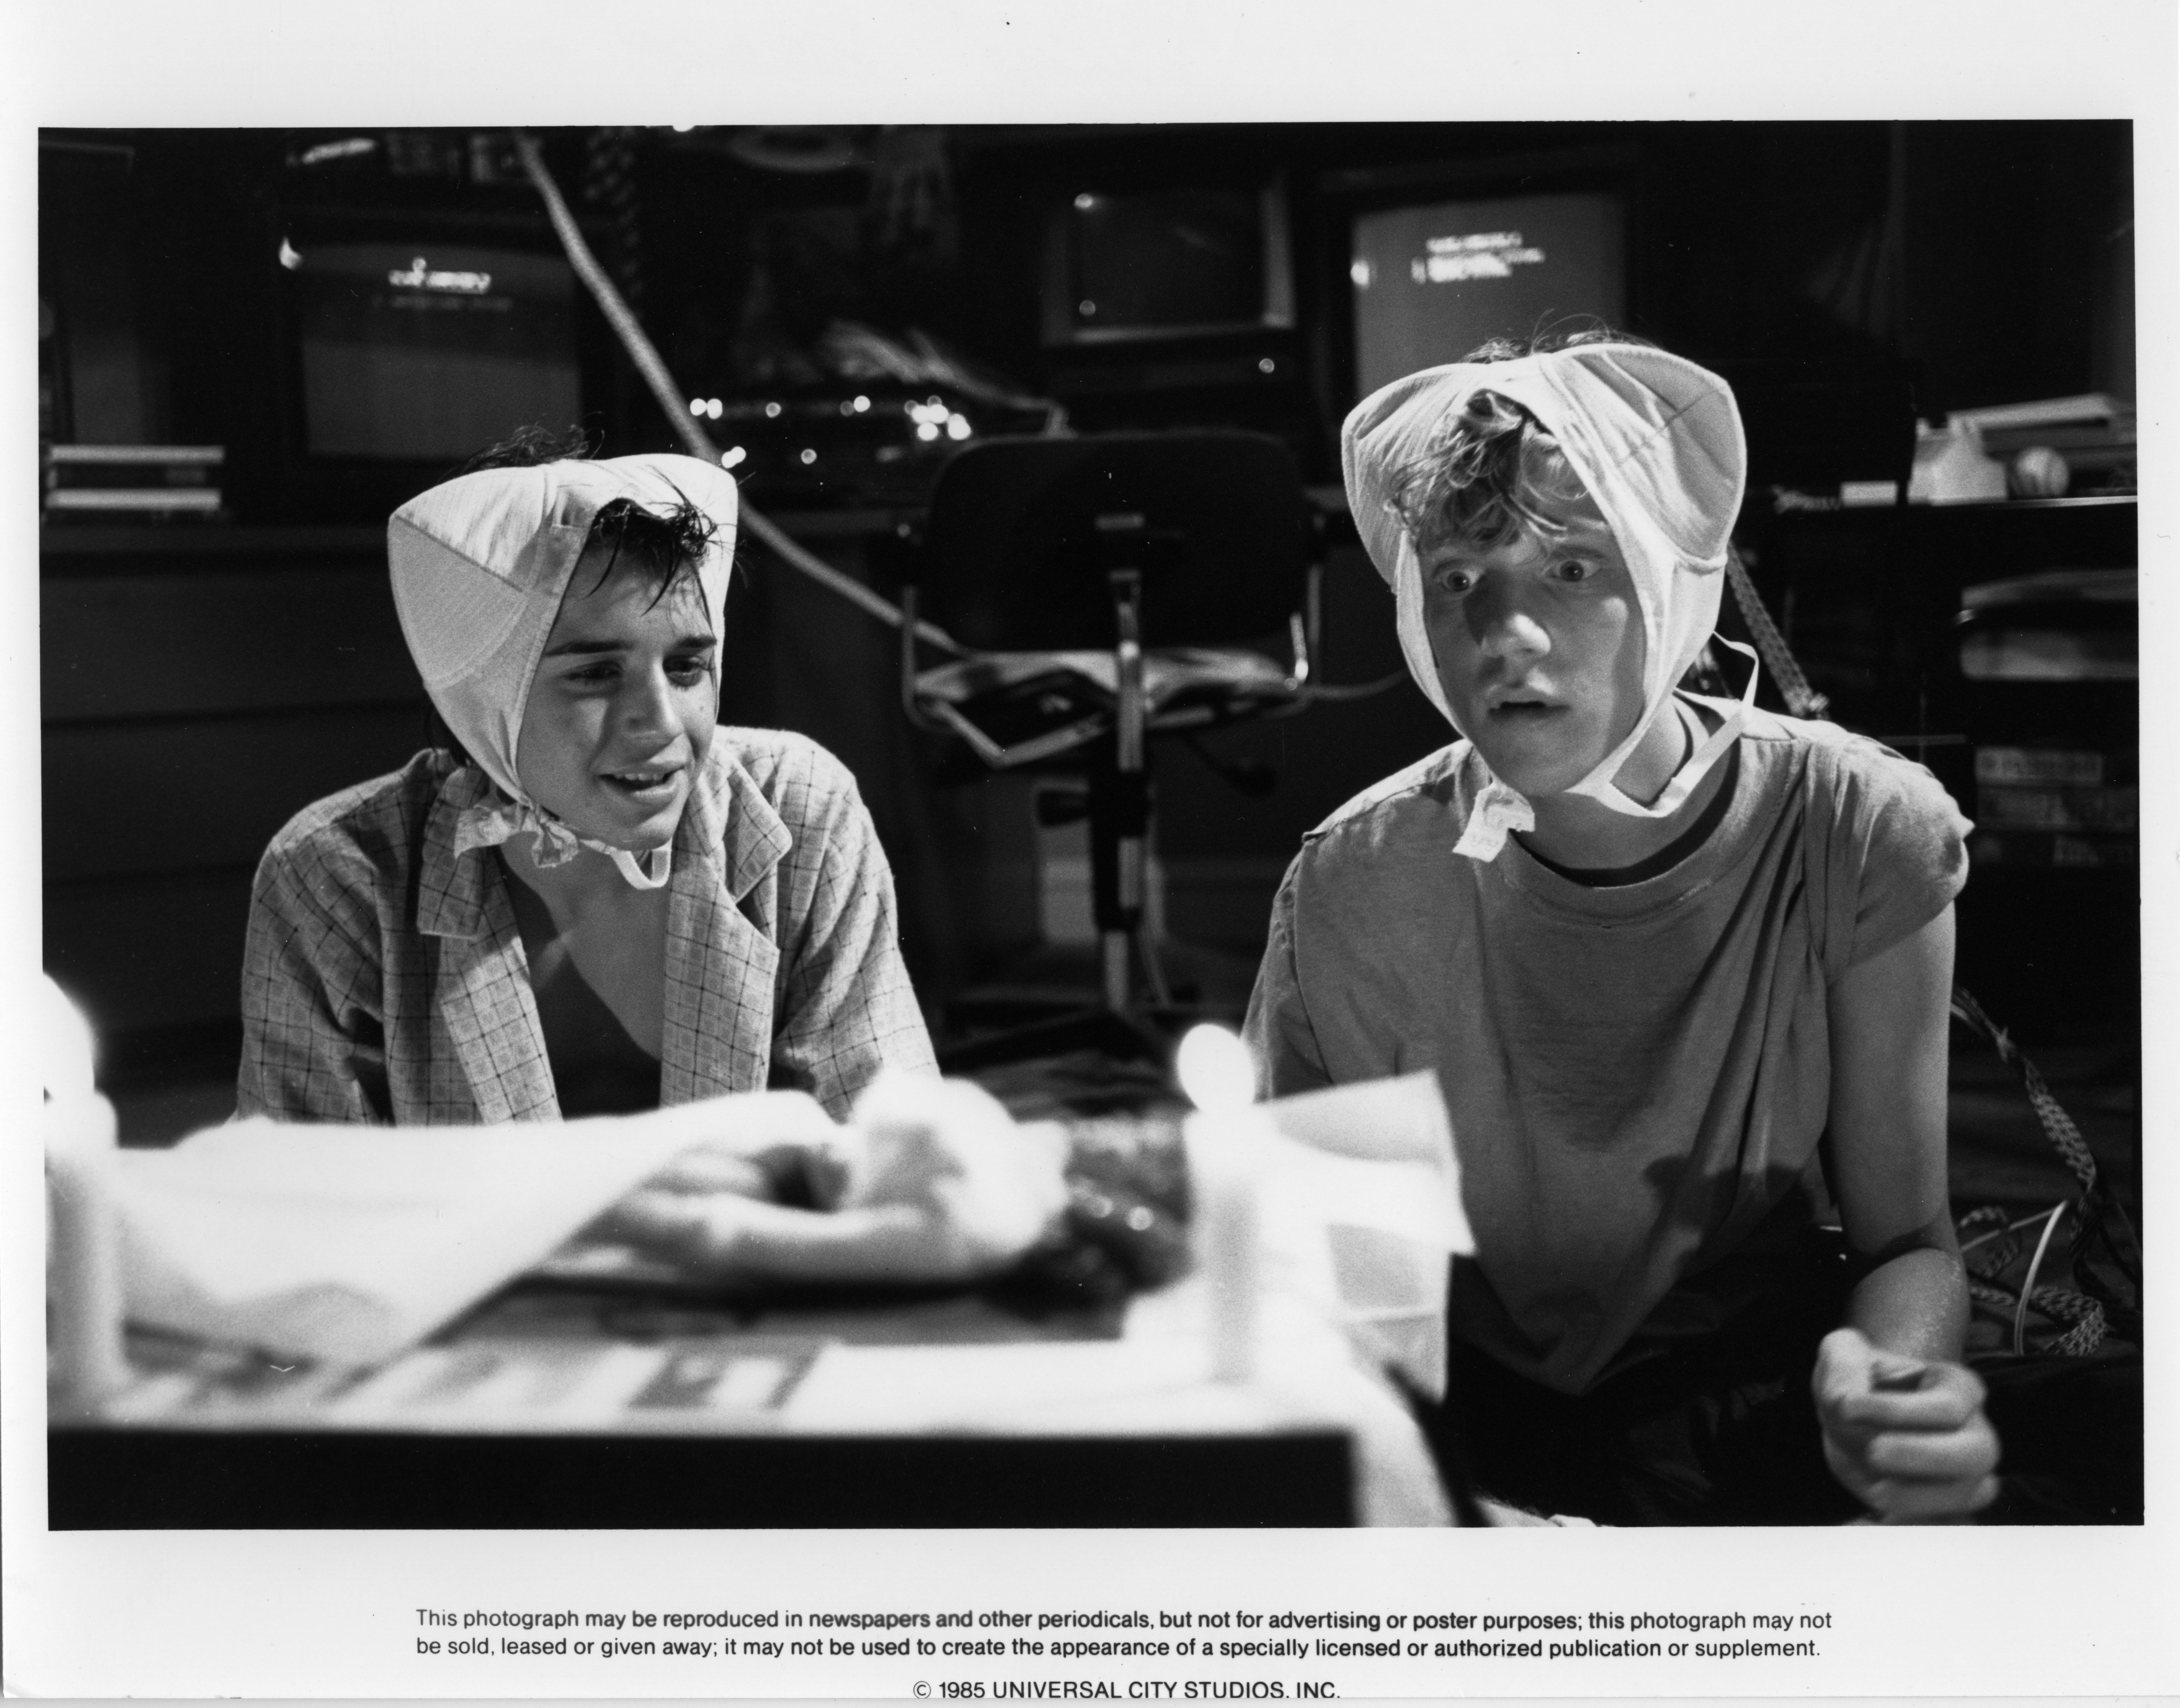 Ilan Mitchell-Smith and Anthony Michael Hall in 'Weird Science'